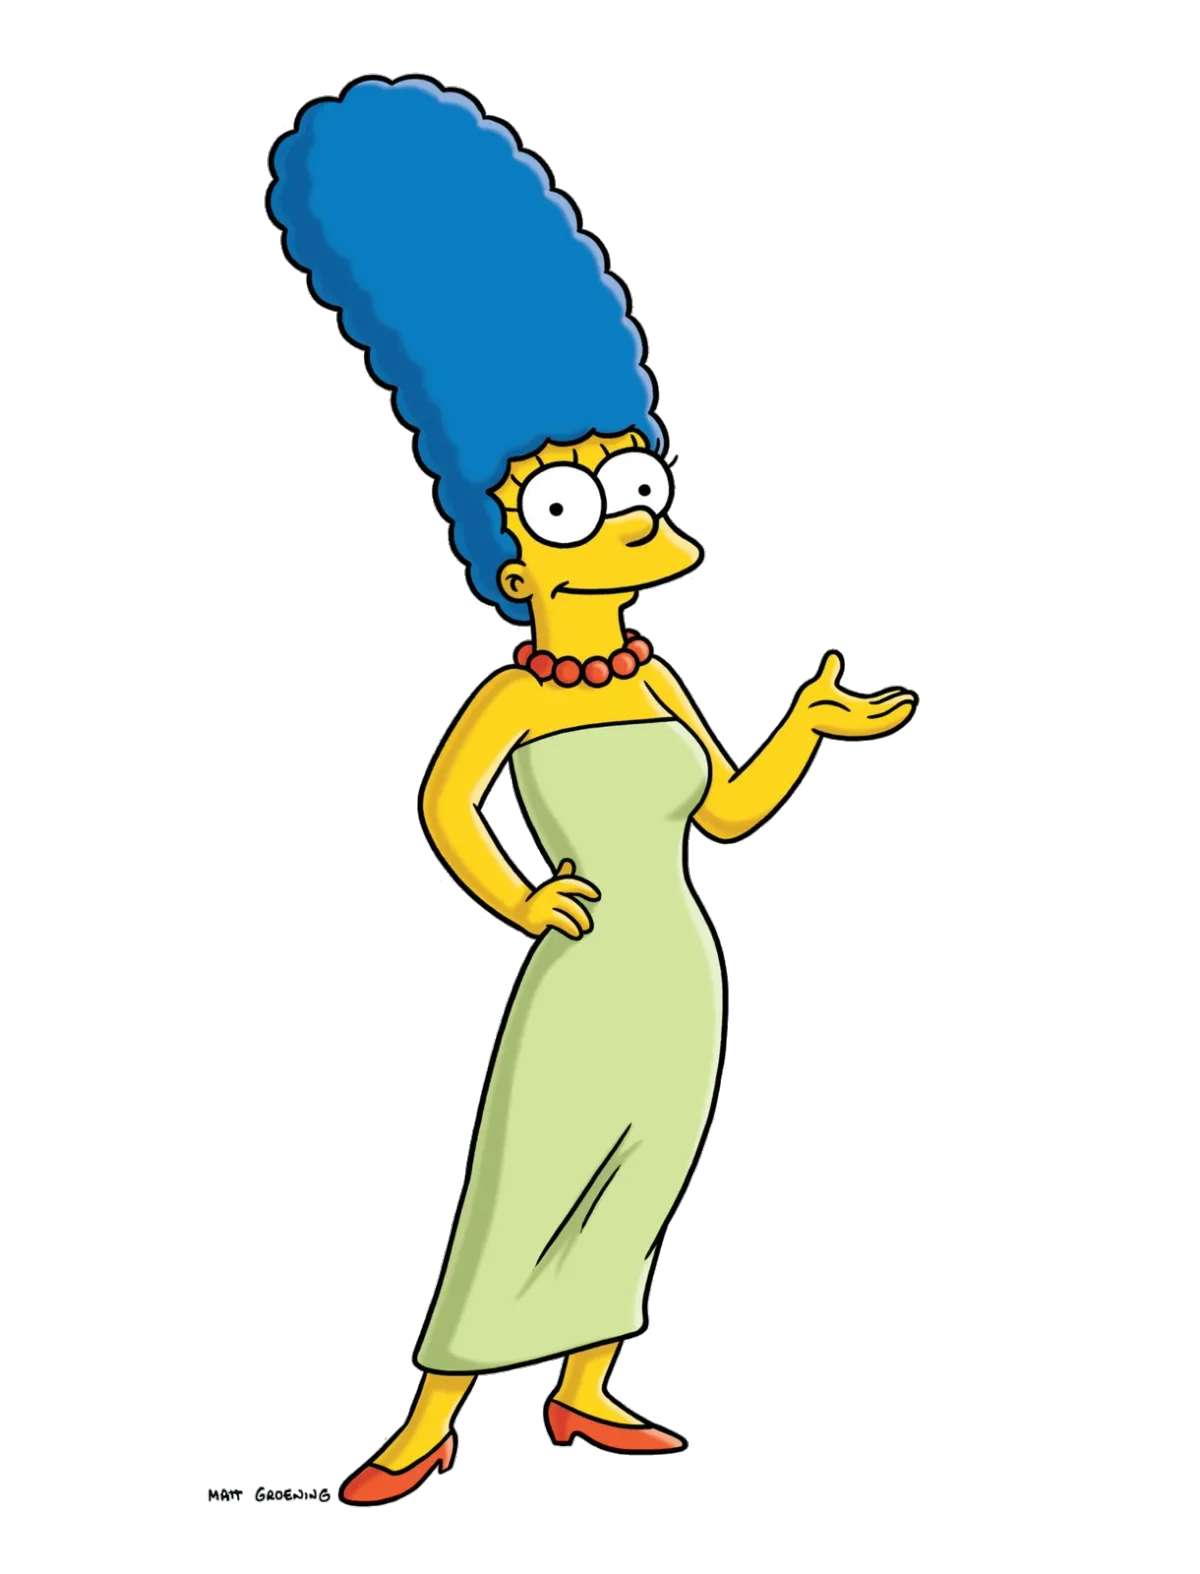 Marge Simpson Quits Show over Equal Pay Row